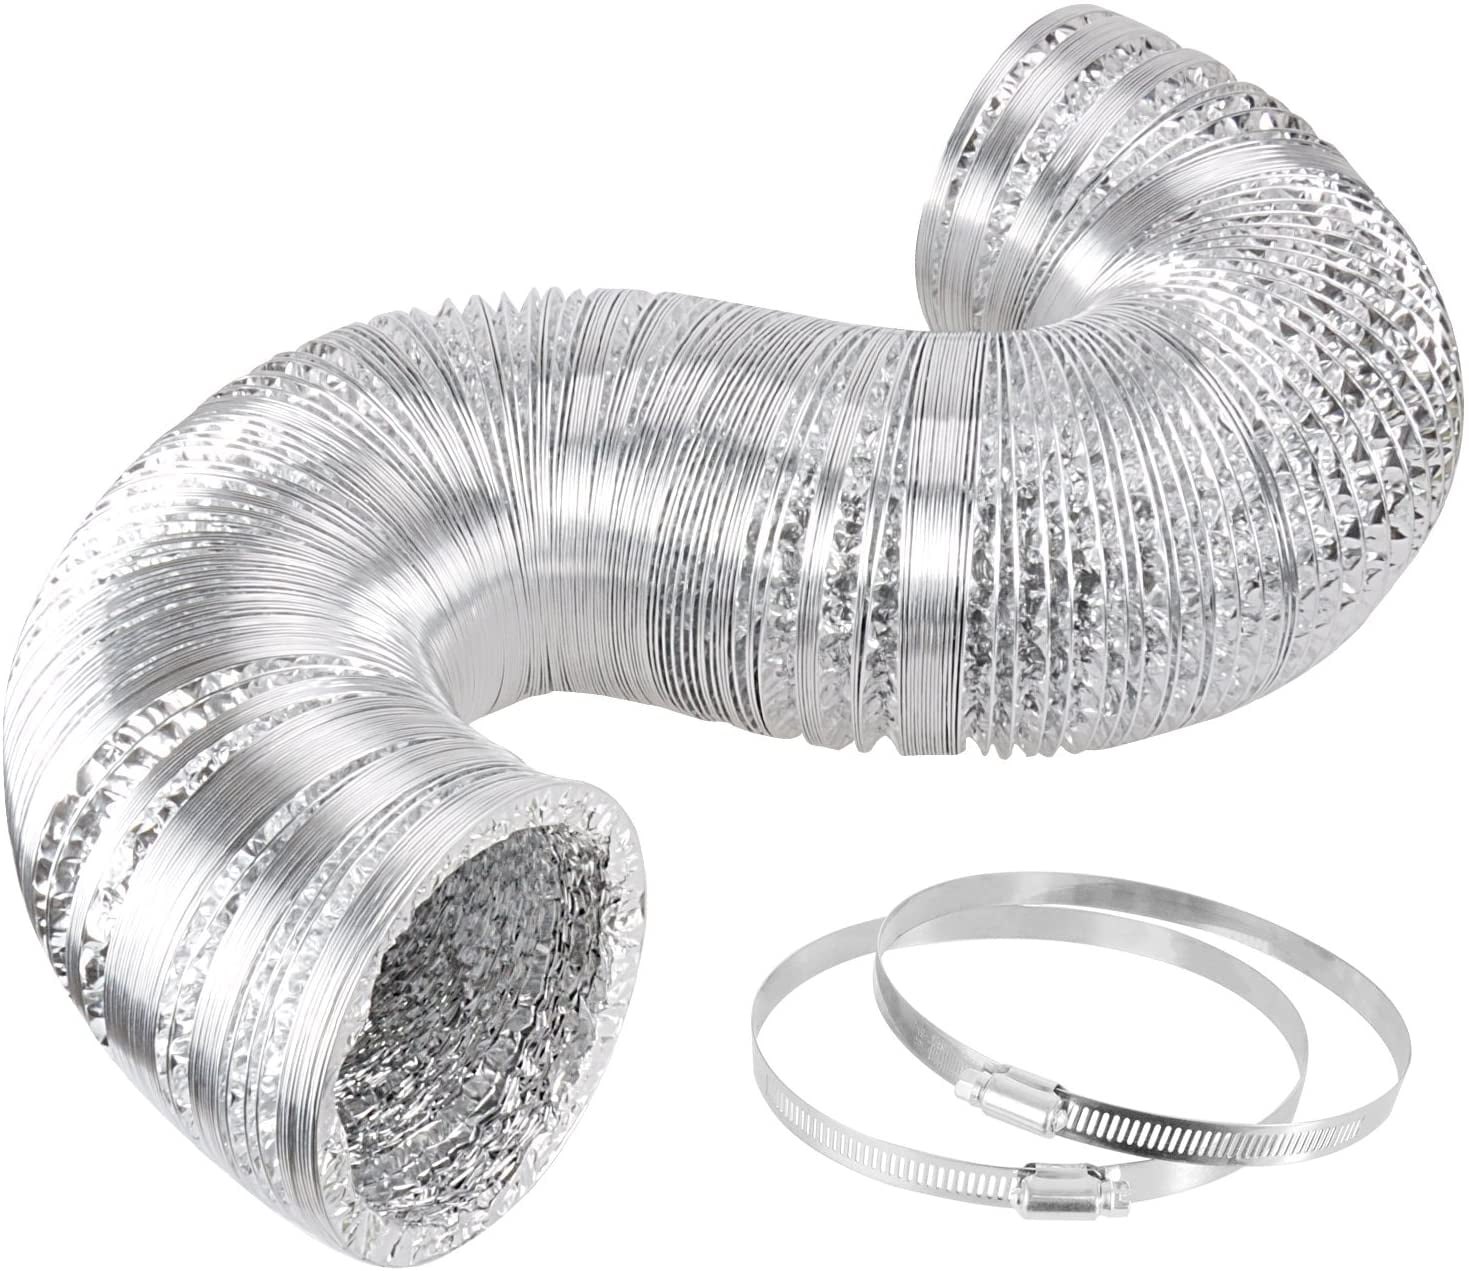 14 Silver iPower GLDUCT14X25C 14 Inch 25 Feet Non-Insulated Flex Air Aluminum Dryer Vent Hose HVAC Ducting 